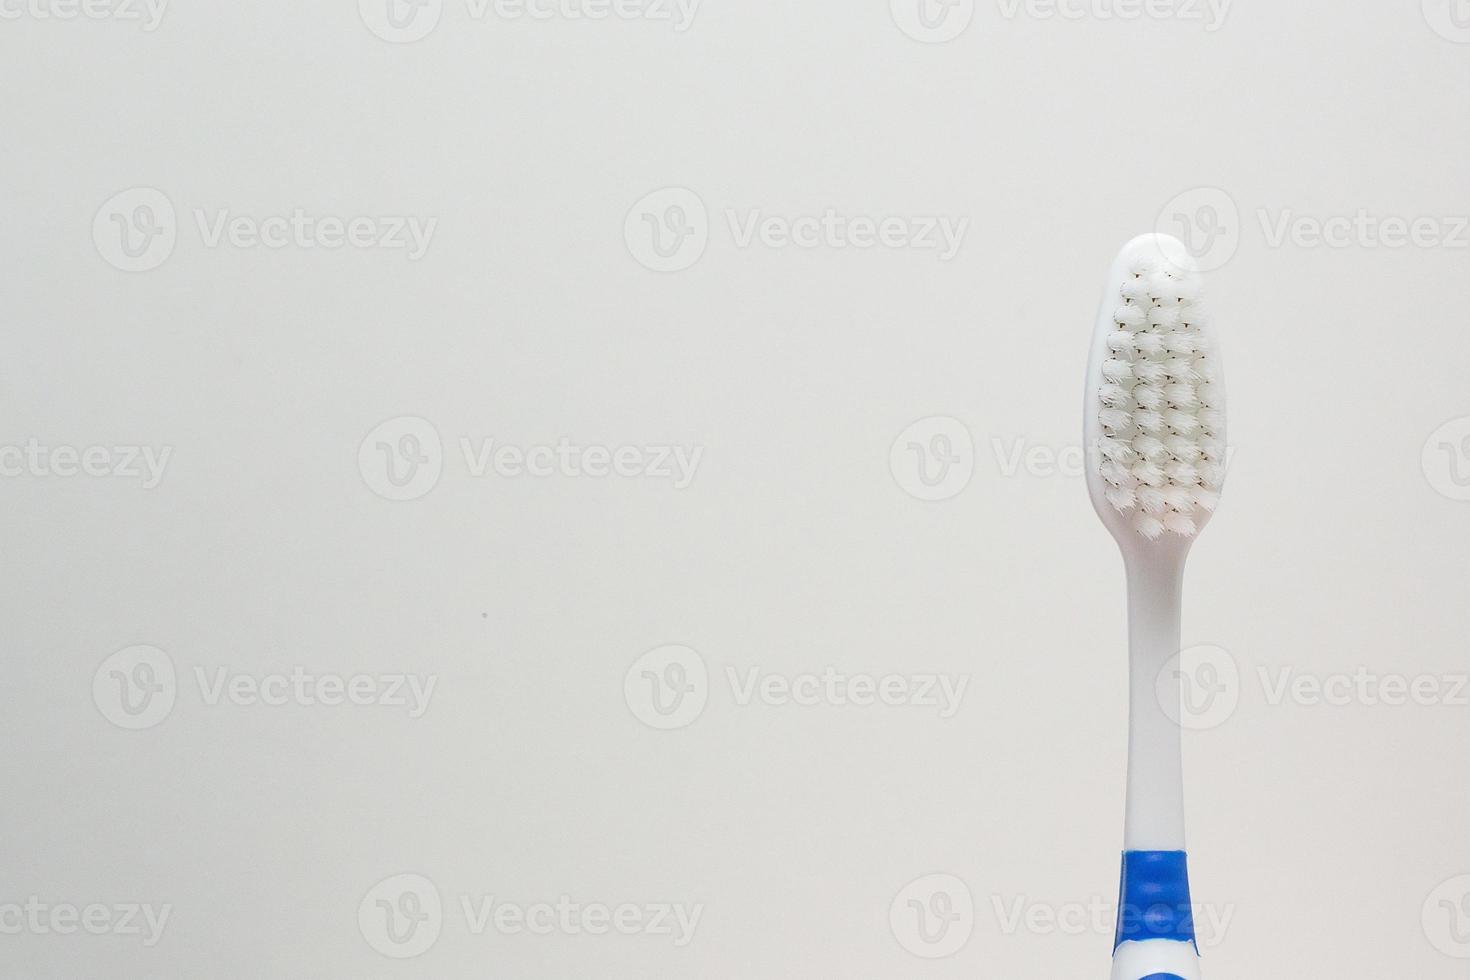 A Toothbrush on white background close up image. photo